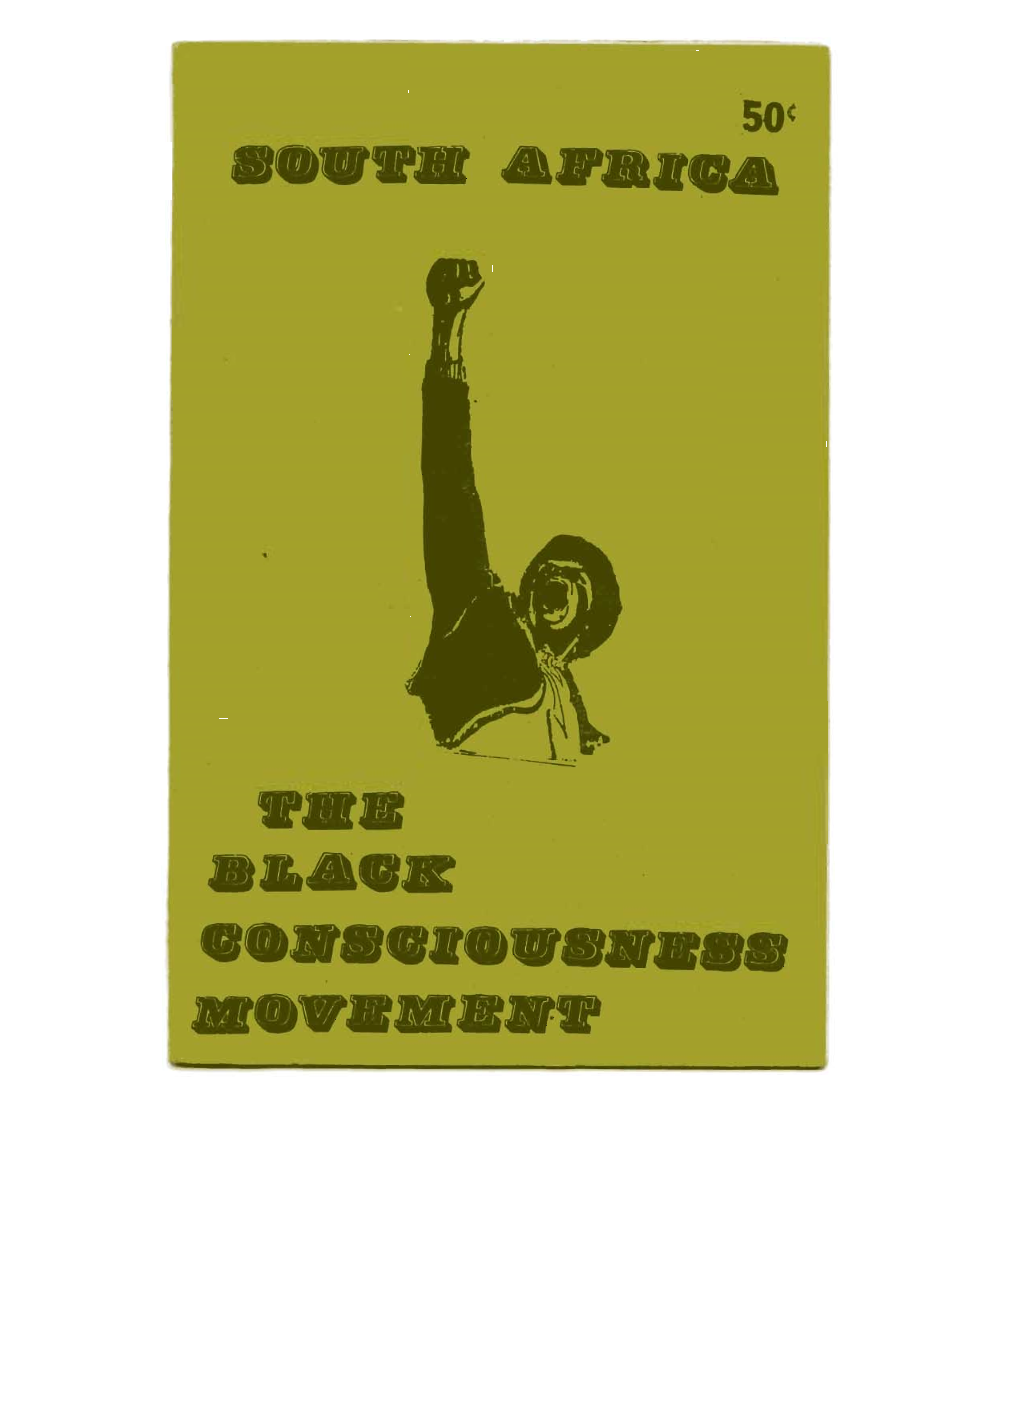 South Africa- the Black Consciousness Movement